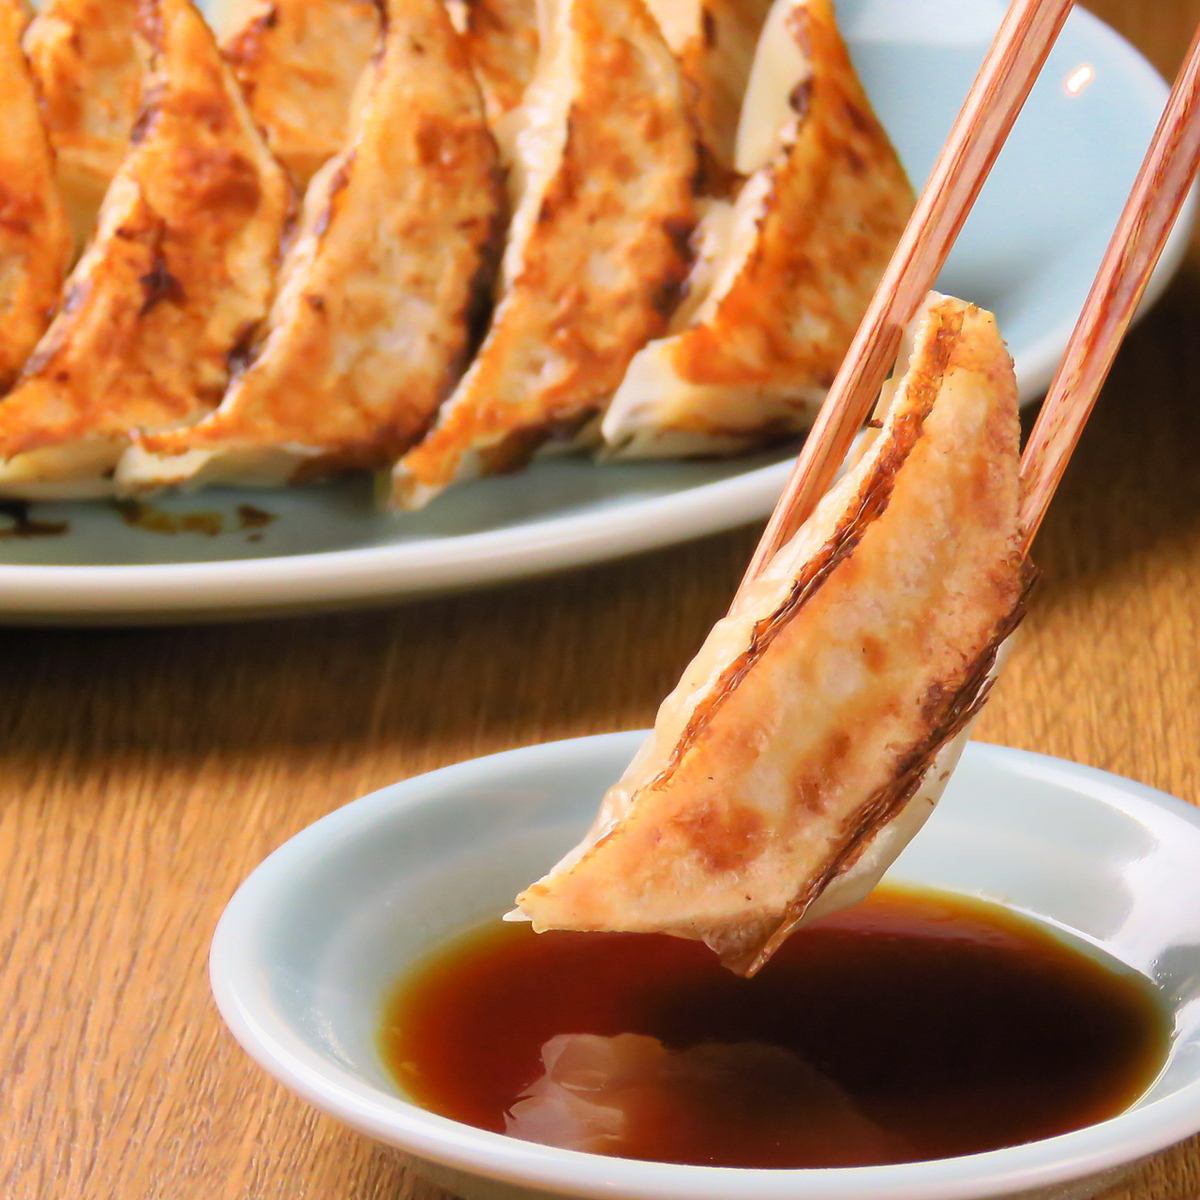 ≪All-you-can-eat grilled dumplings≫ Course / All-you-can-drink with 120 minutes / 7 dishes 3,500 yen